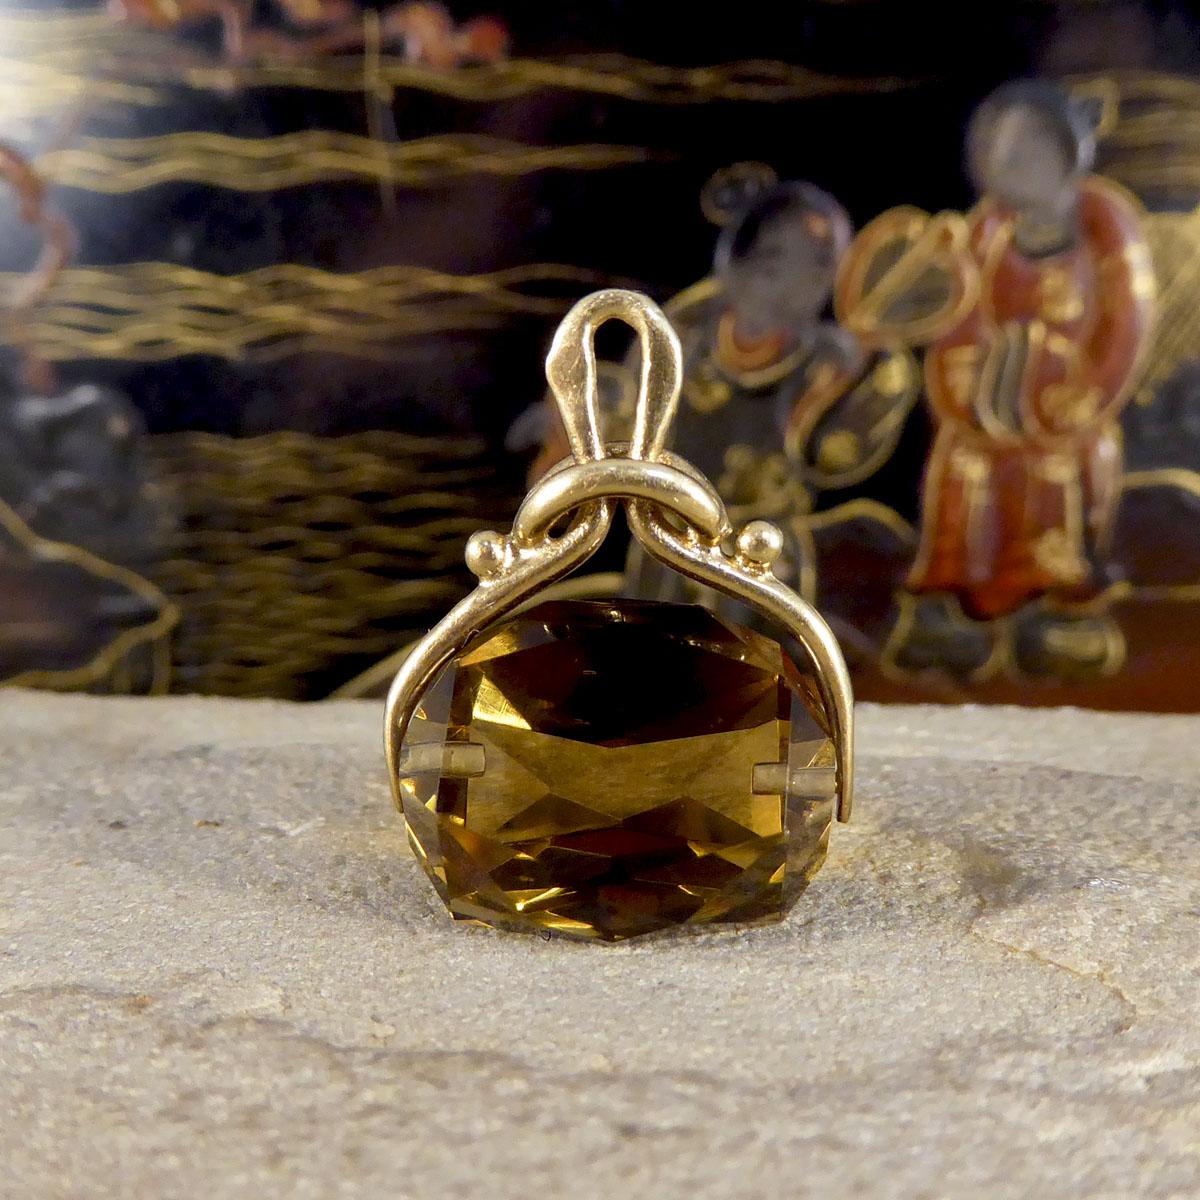 An original Victorian Smokey Quartz fob pendant. This great quality and crisp triple sided, faceted Smokey Quartz gemstone is mounted in decorative 9ct Yellow Gold. The Gold setting has beautiful detail leading to an almost tied knot design, stamped